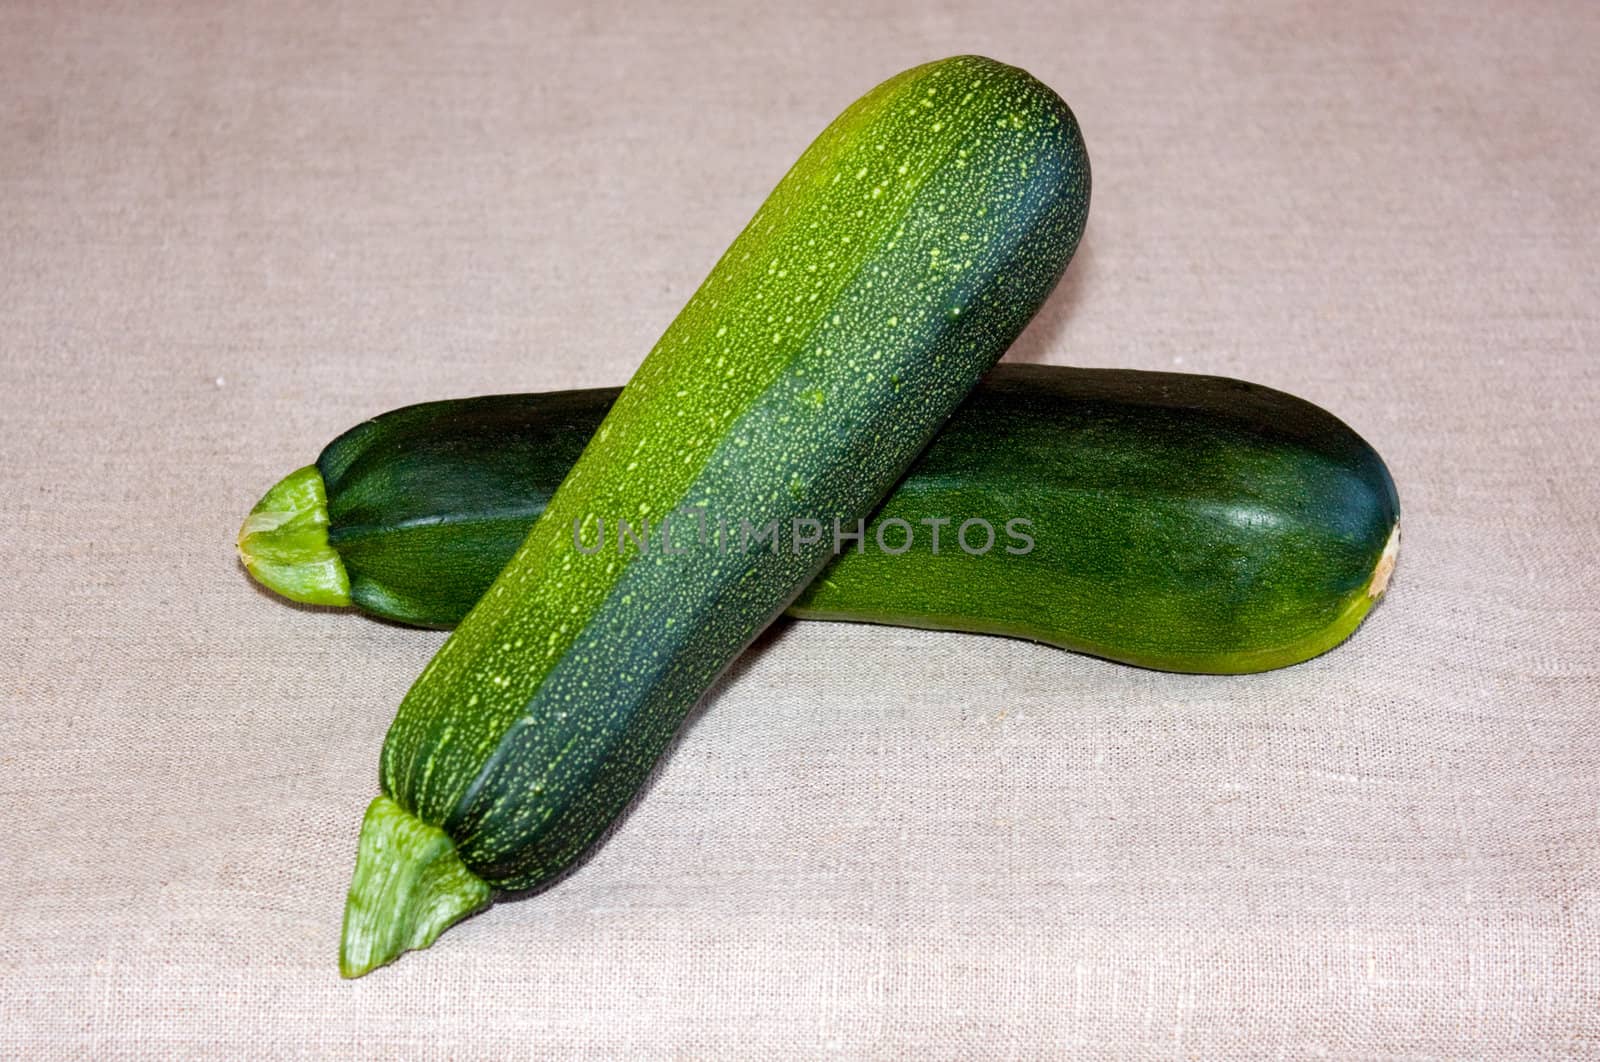 Two green vegetable marrows